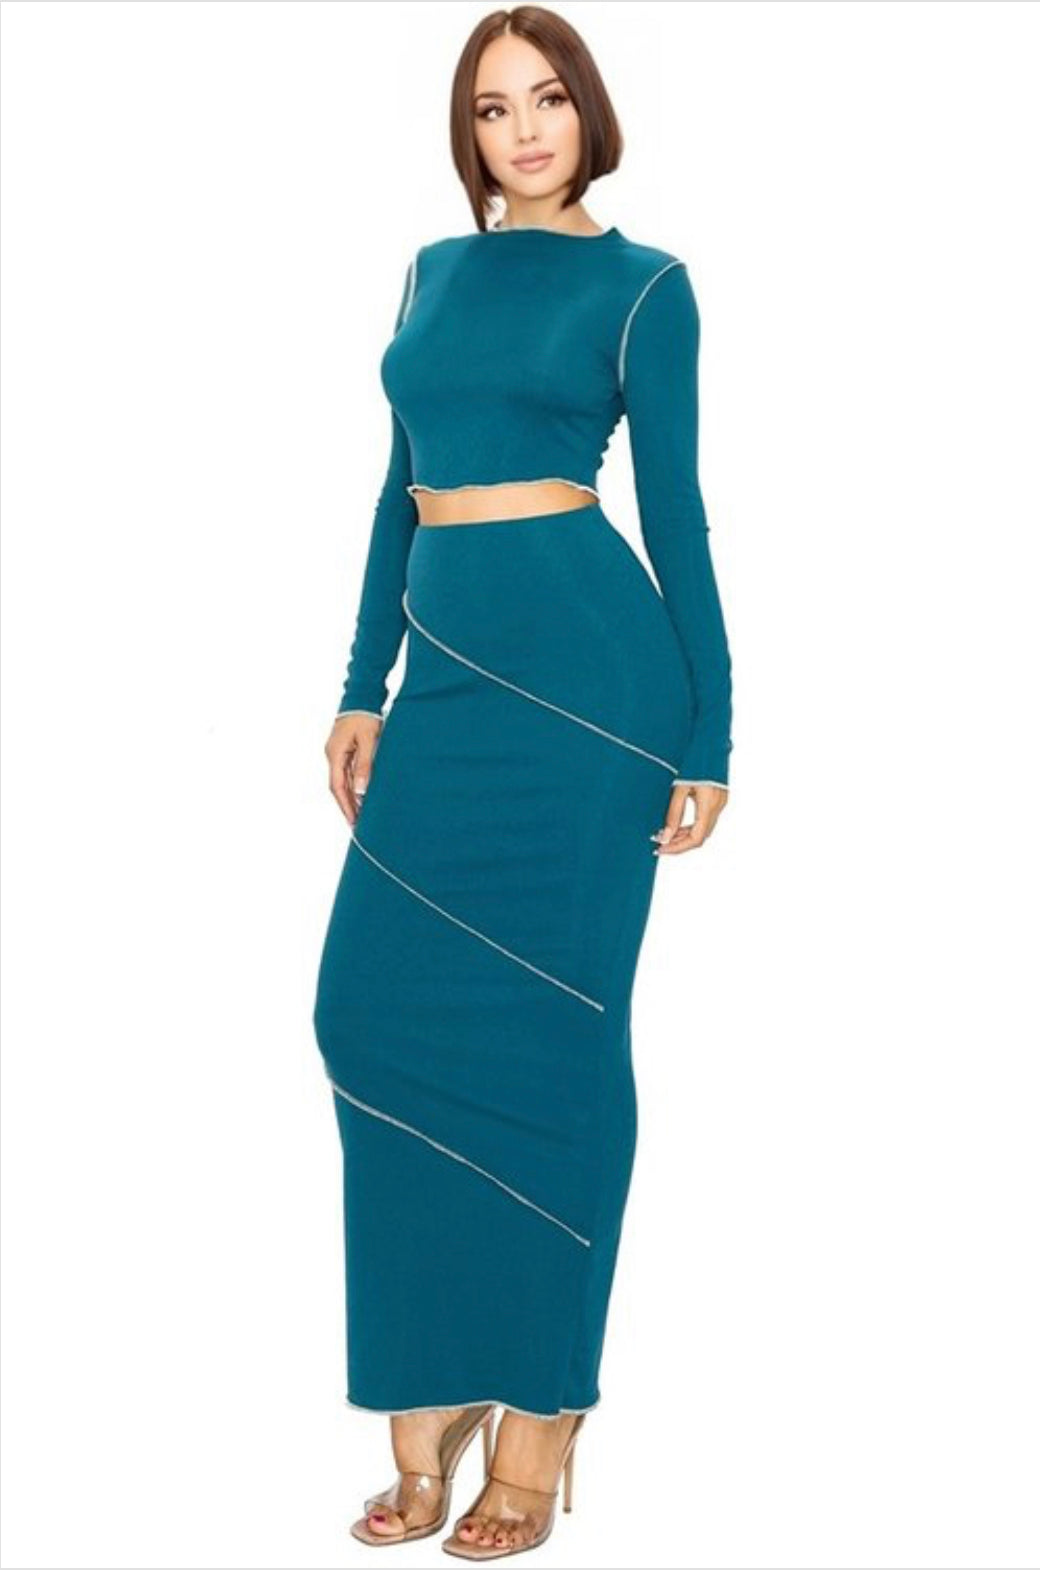 SOLID CONTRAST OVERLOCK STITCH 2 PIECE MAXI SKIRT SET New Arrival